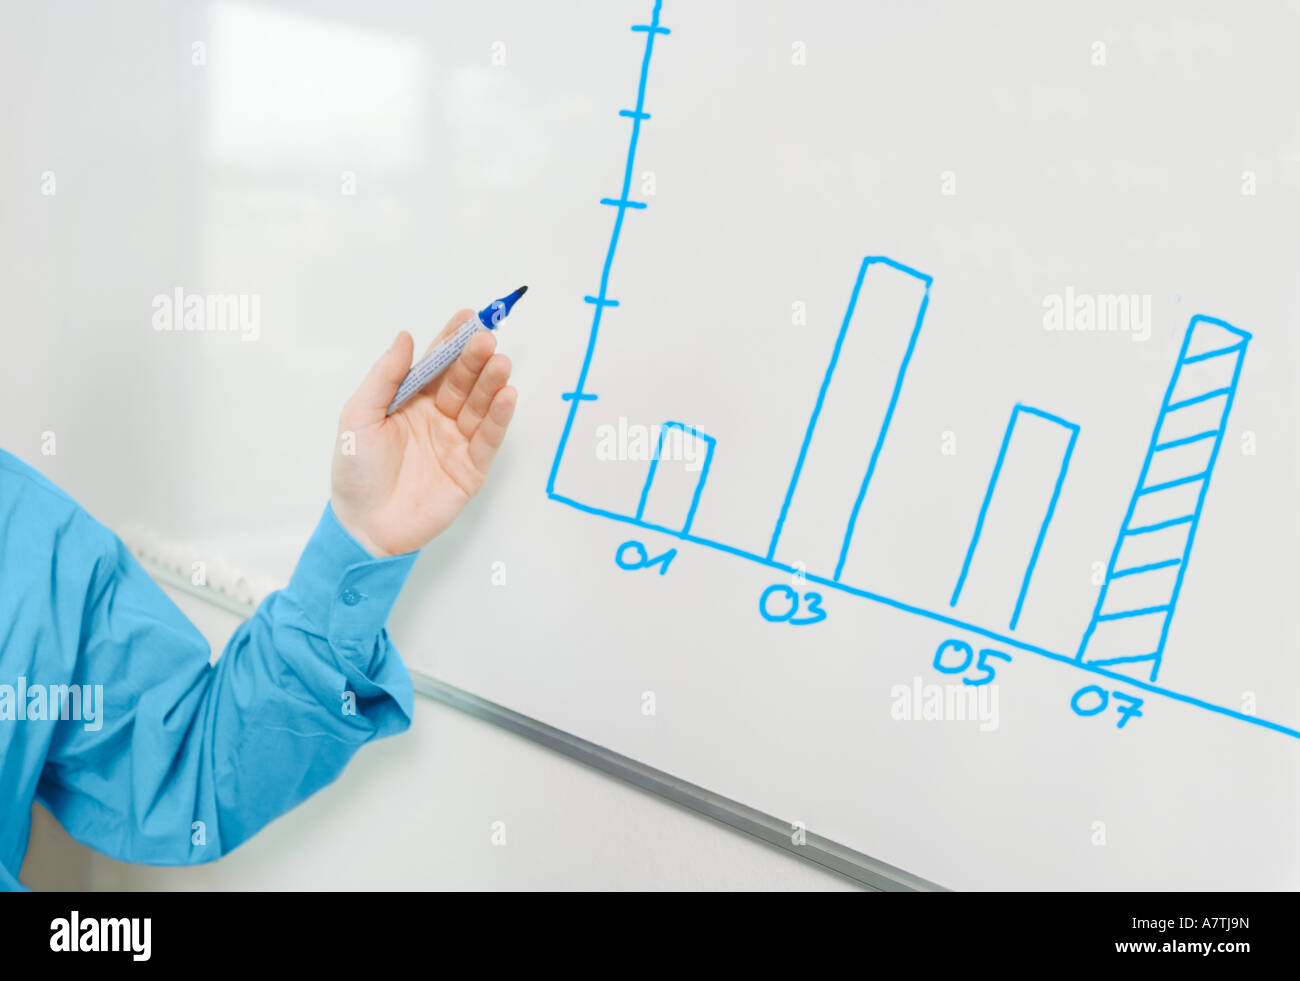 Close-up of man's hand pointing towards whiteboard Stock Photo